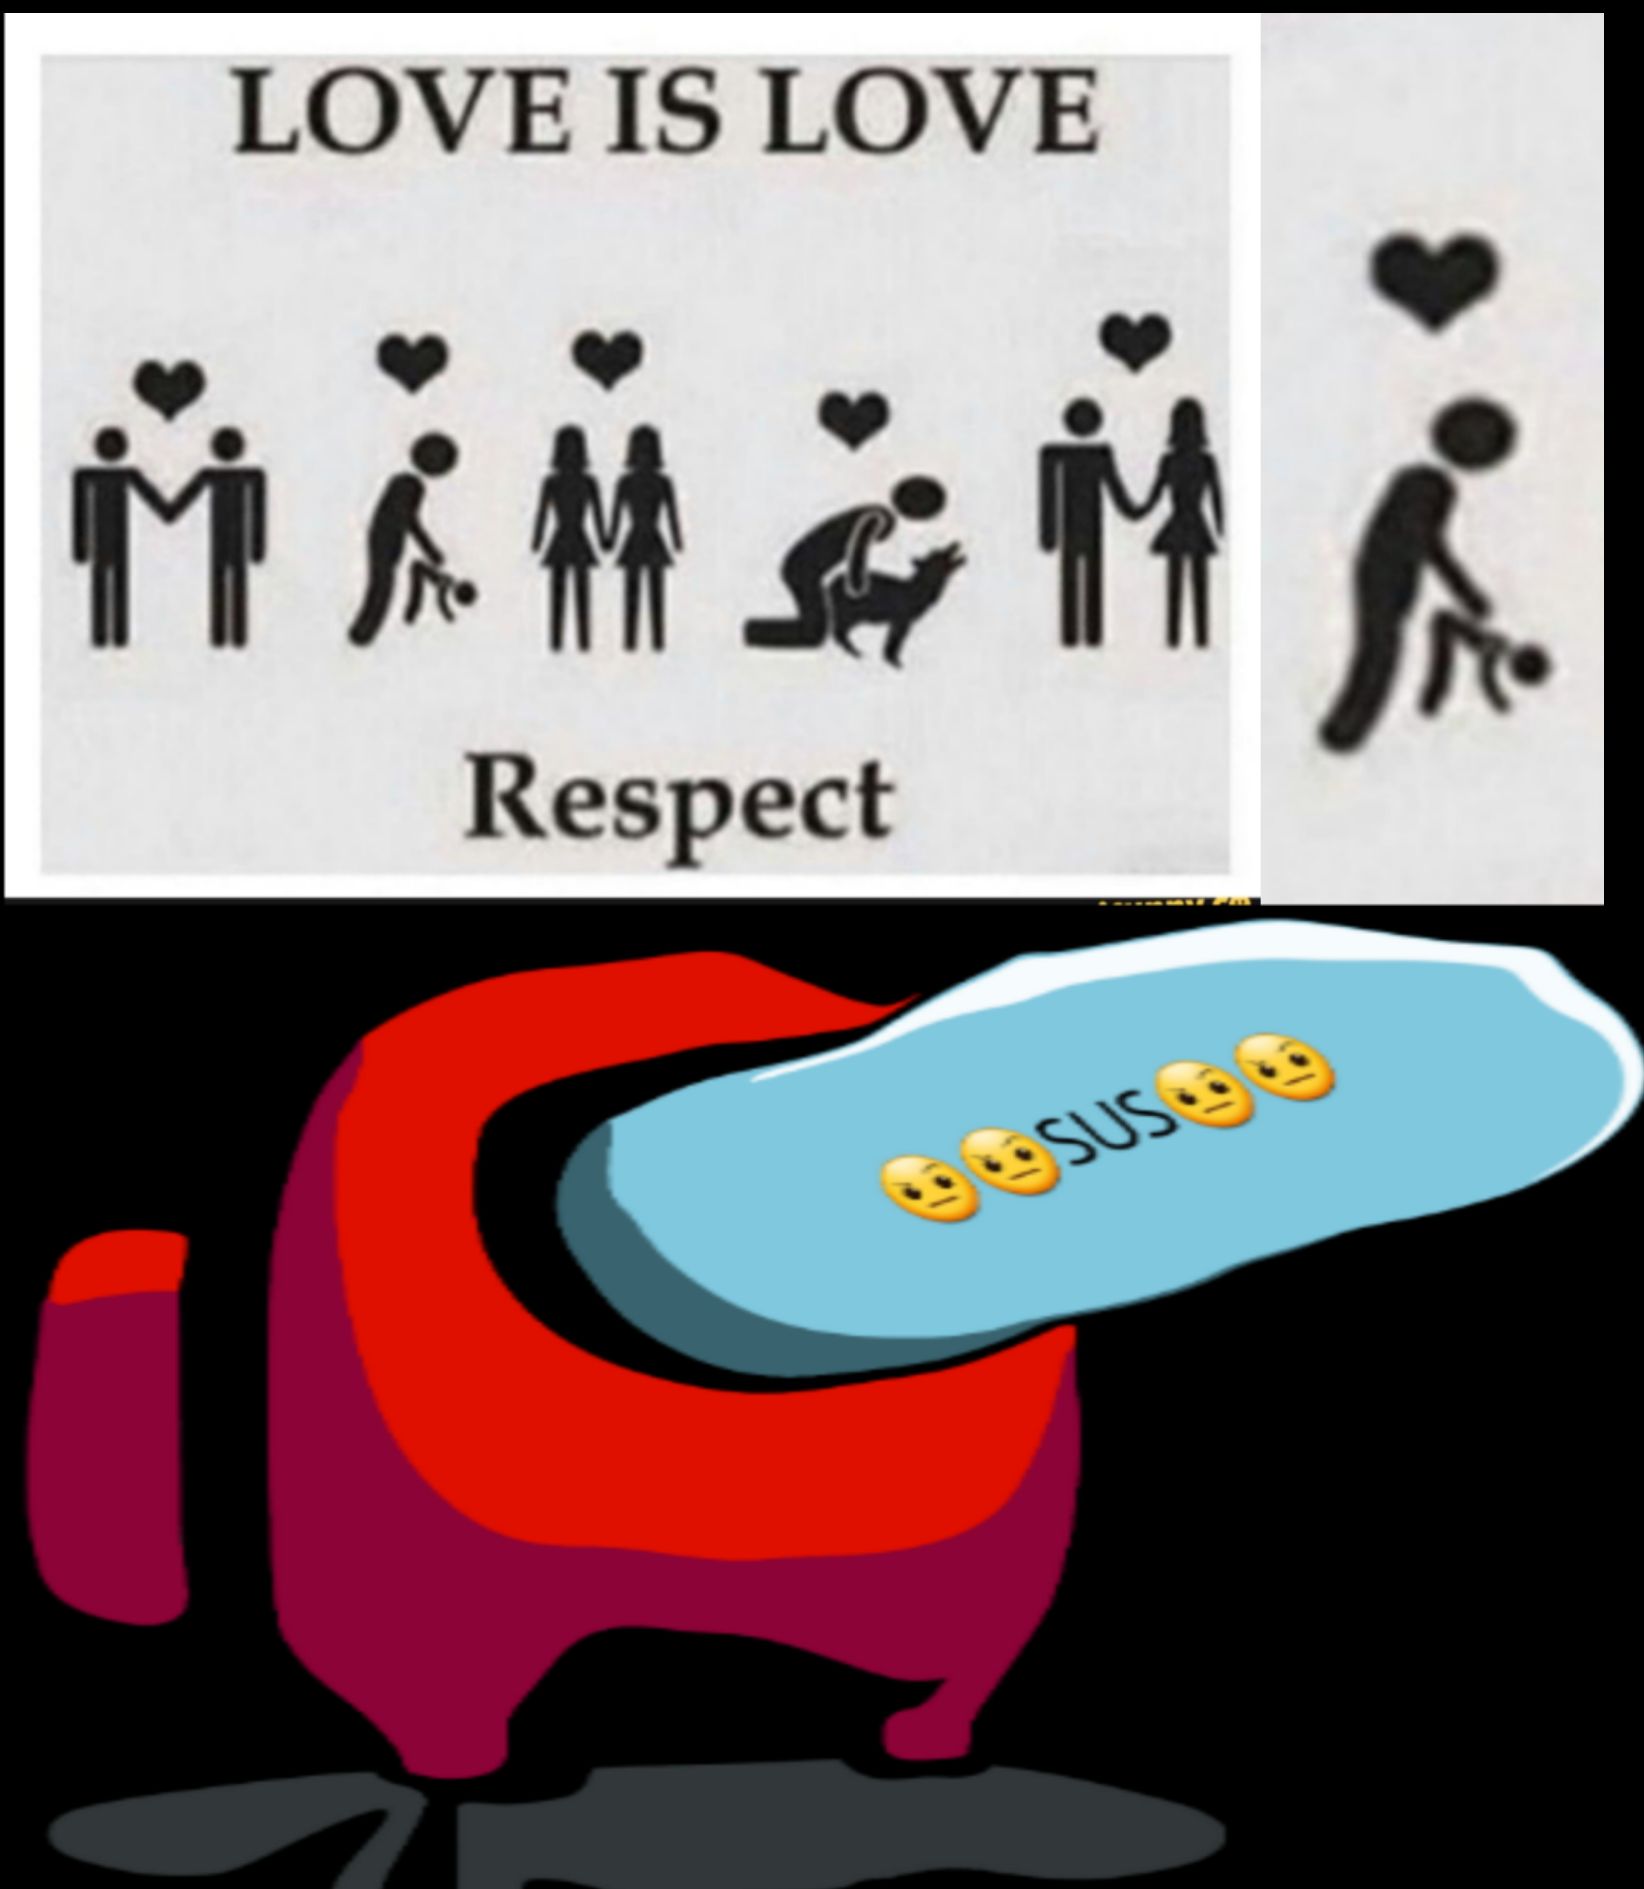 LOVE IS LOVE
作品种品
Respect
ASUSE